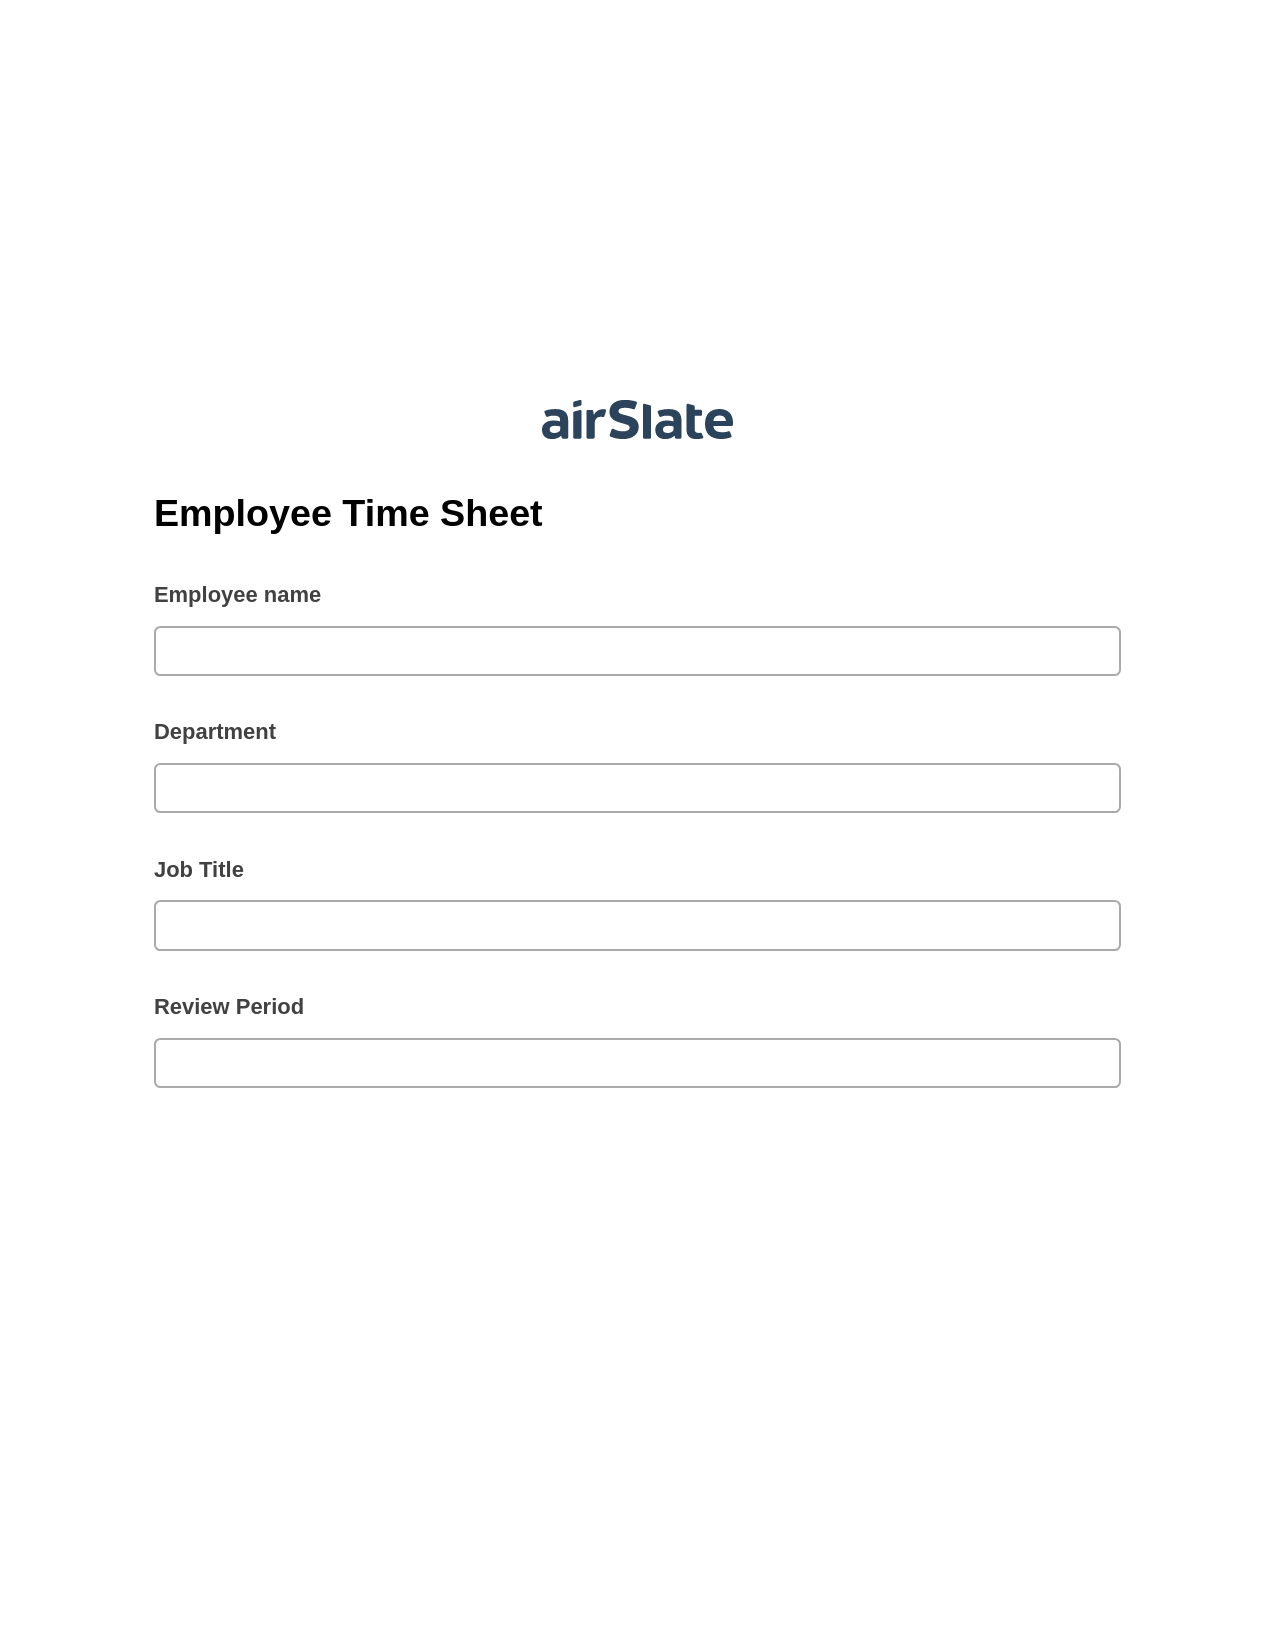 Employee Time Sheet Pre-fill Dropdowns from CSV file Bot, Assign Roles to Recipients Bot, Export to Excel 365 Bot